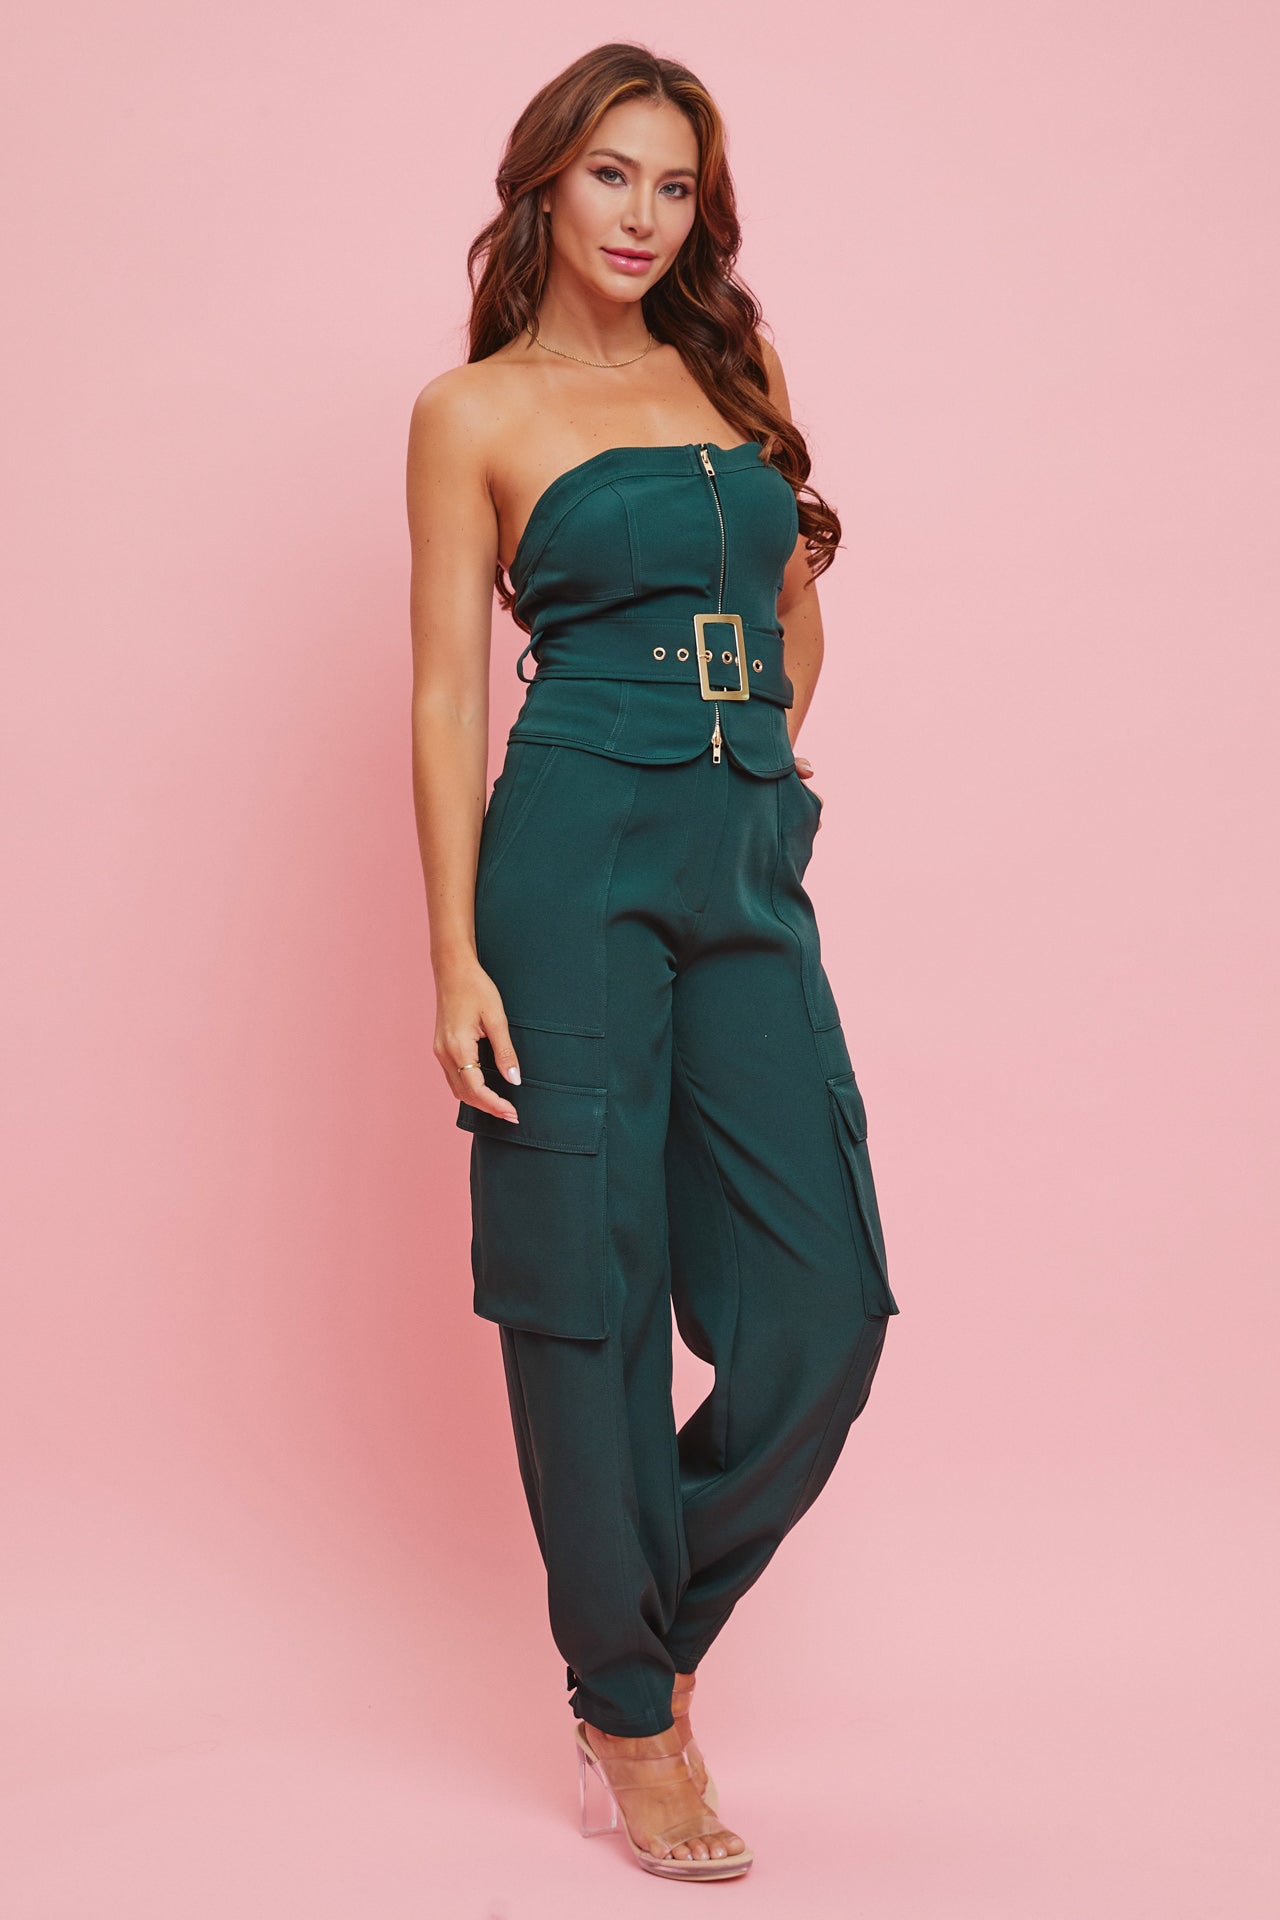 Woven Cargo Tube Top and Pants Set